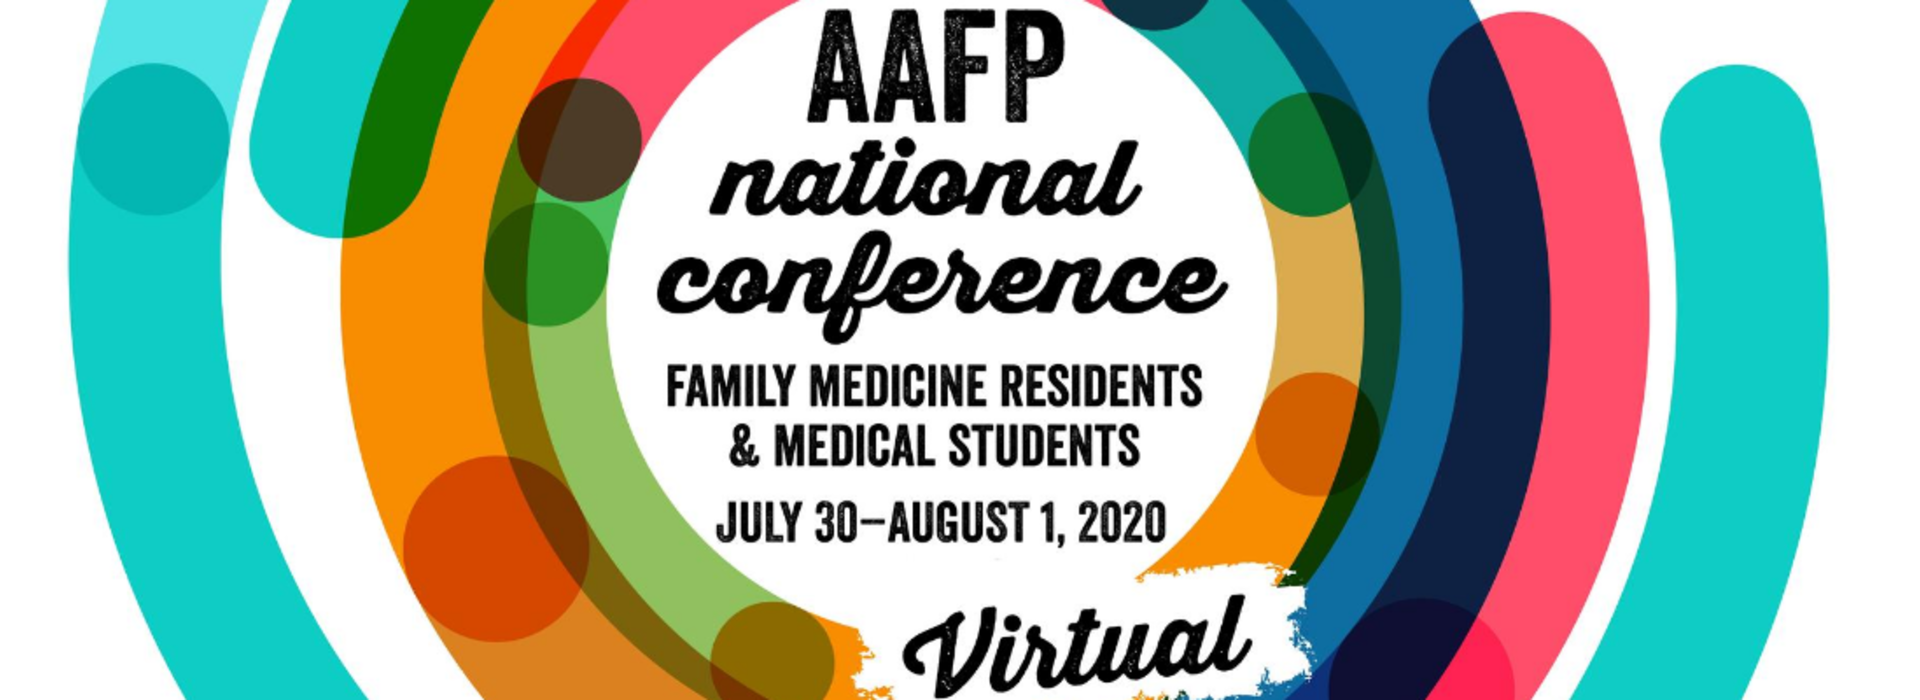 Family Medicine Student Interest Group Recognized by AAFP for Program of Excellence in Family Medicine 